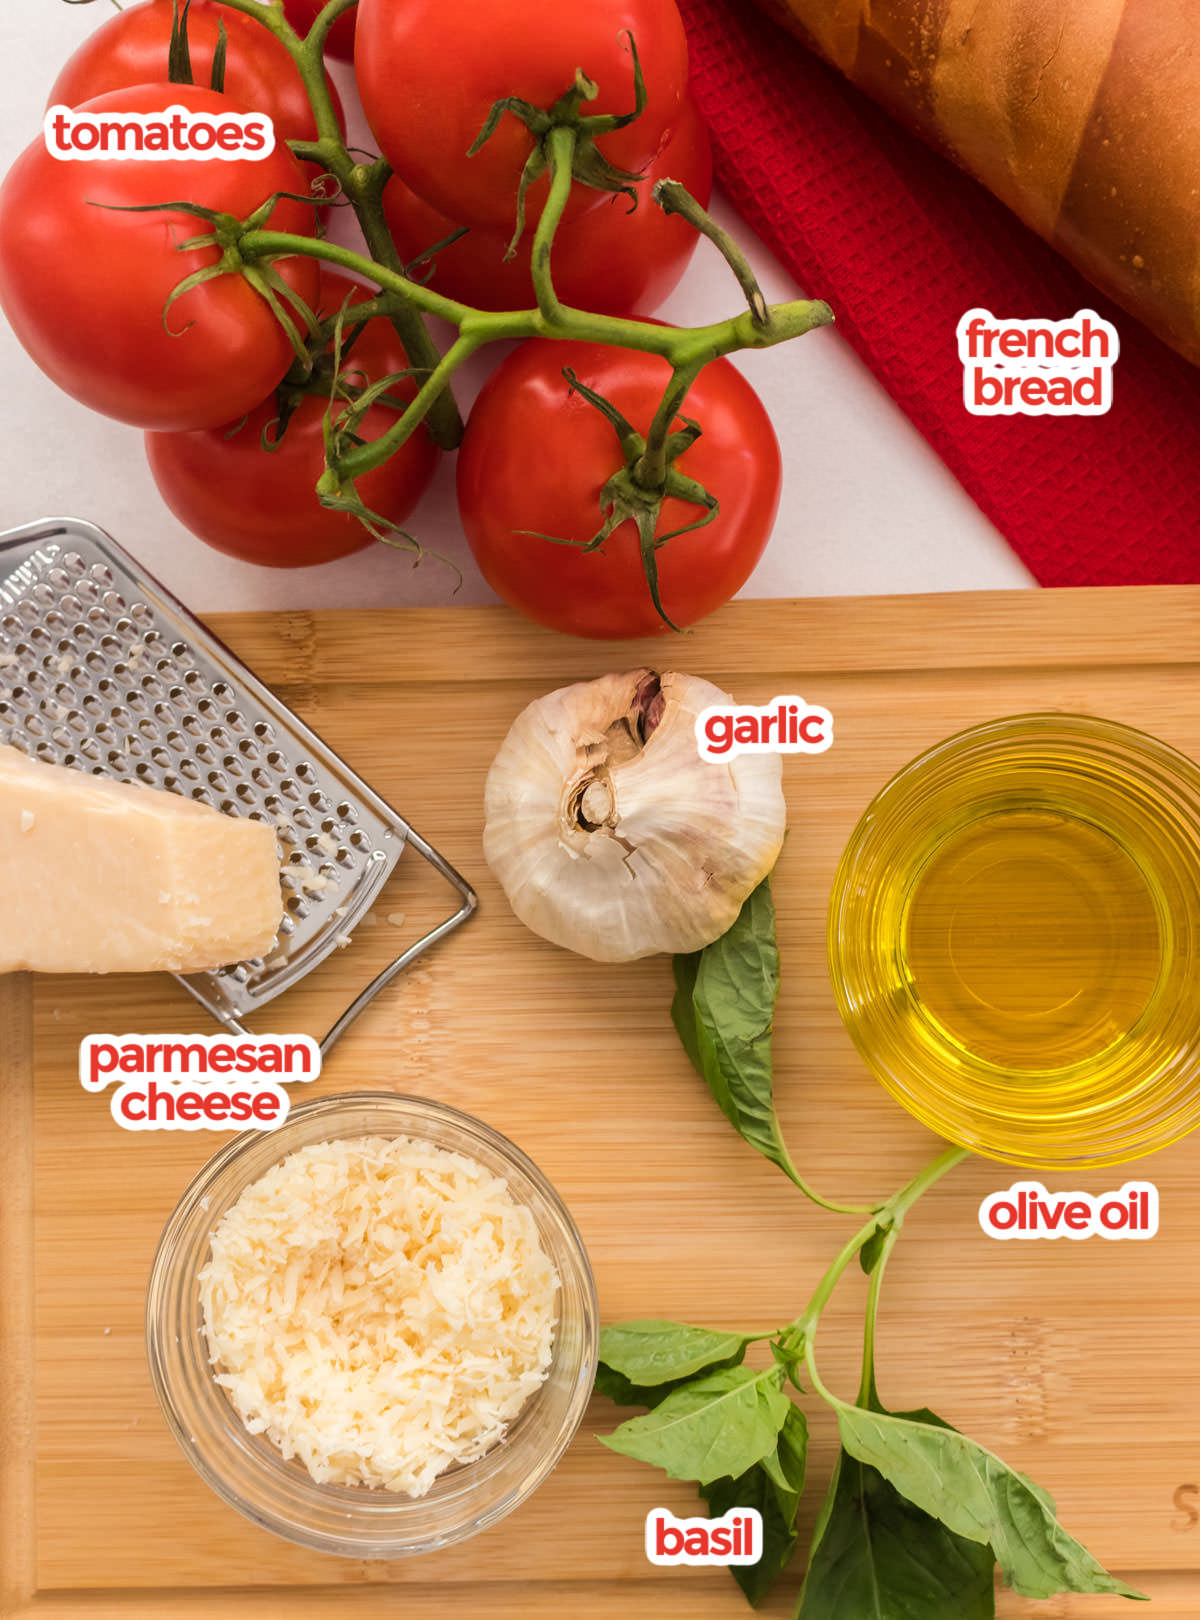 Italian Bruschetta recipe ingredients on a table including red tomatoes, garlic, parmesan cheese, oil and more.